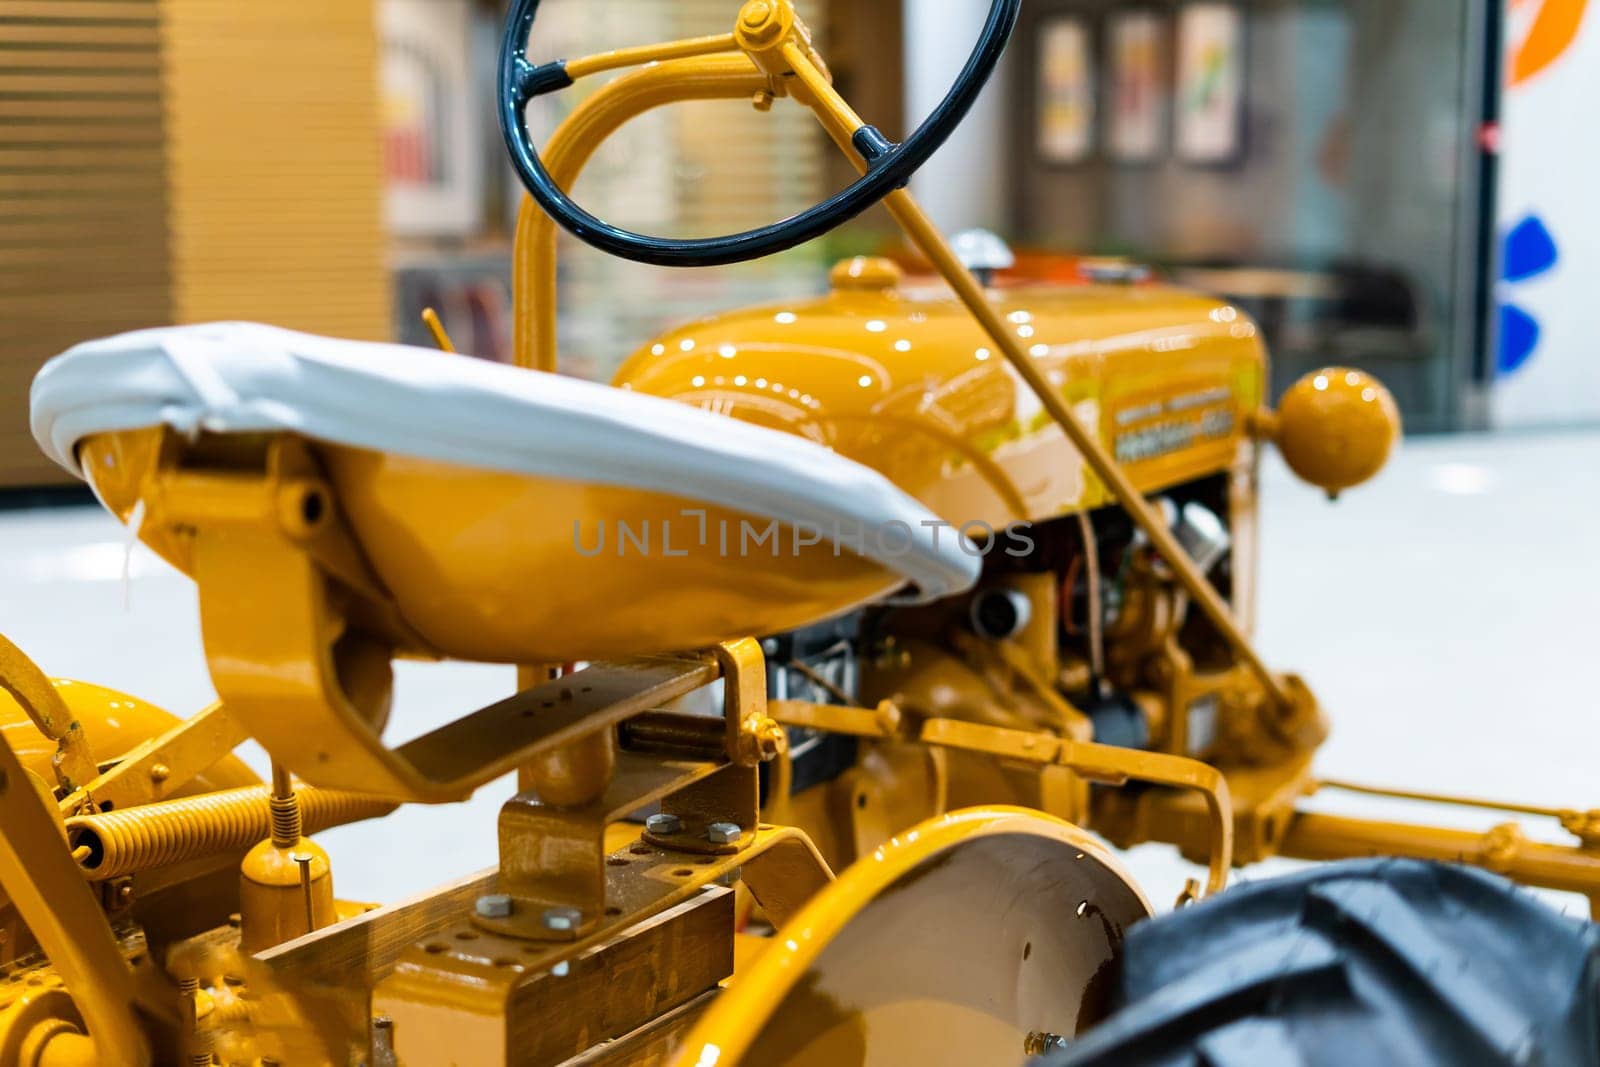 Small yellow tractor in exhibition, closeup details, wheels by Zelenin